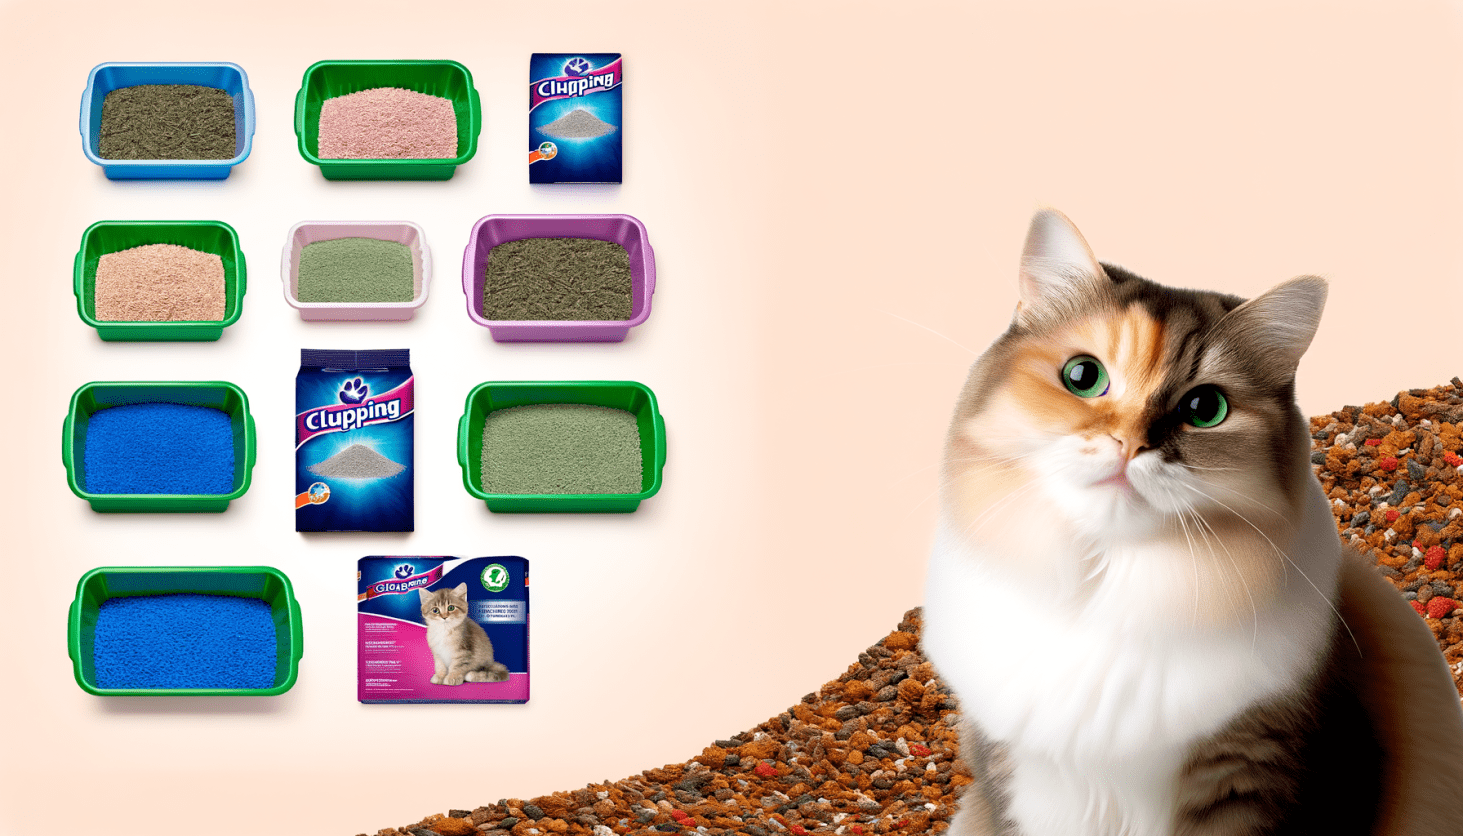 Different types of cat litter displayed with a content feline nearby.